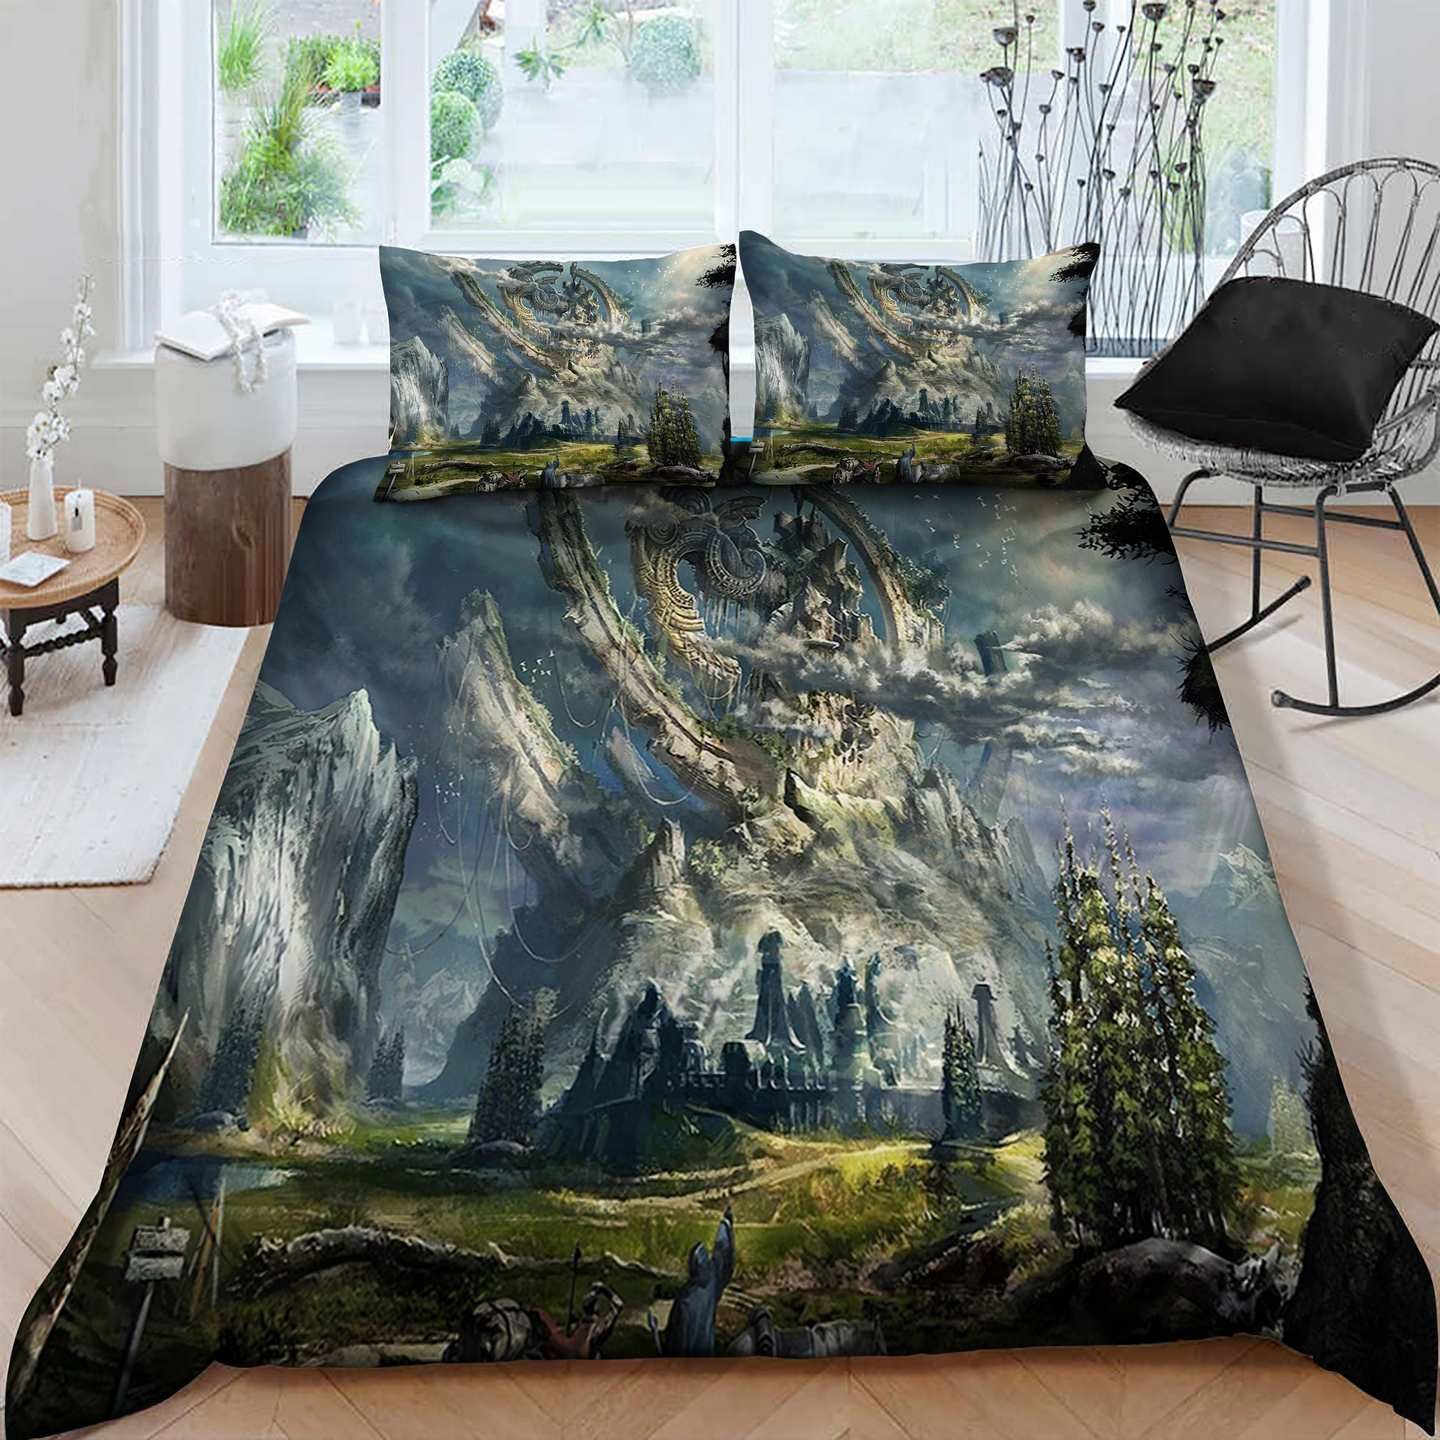 Nature Scenery Bedding Sets